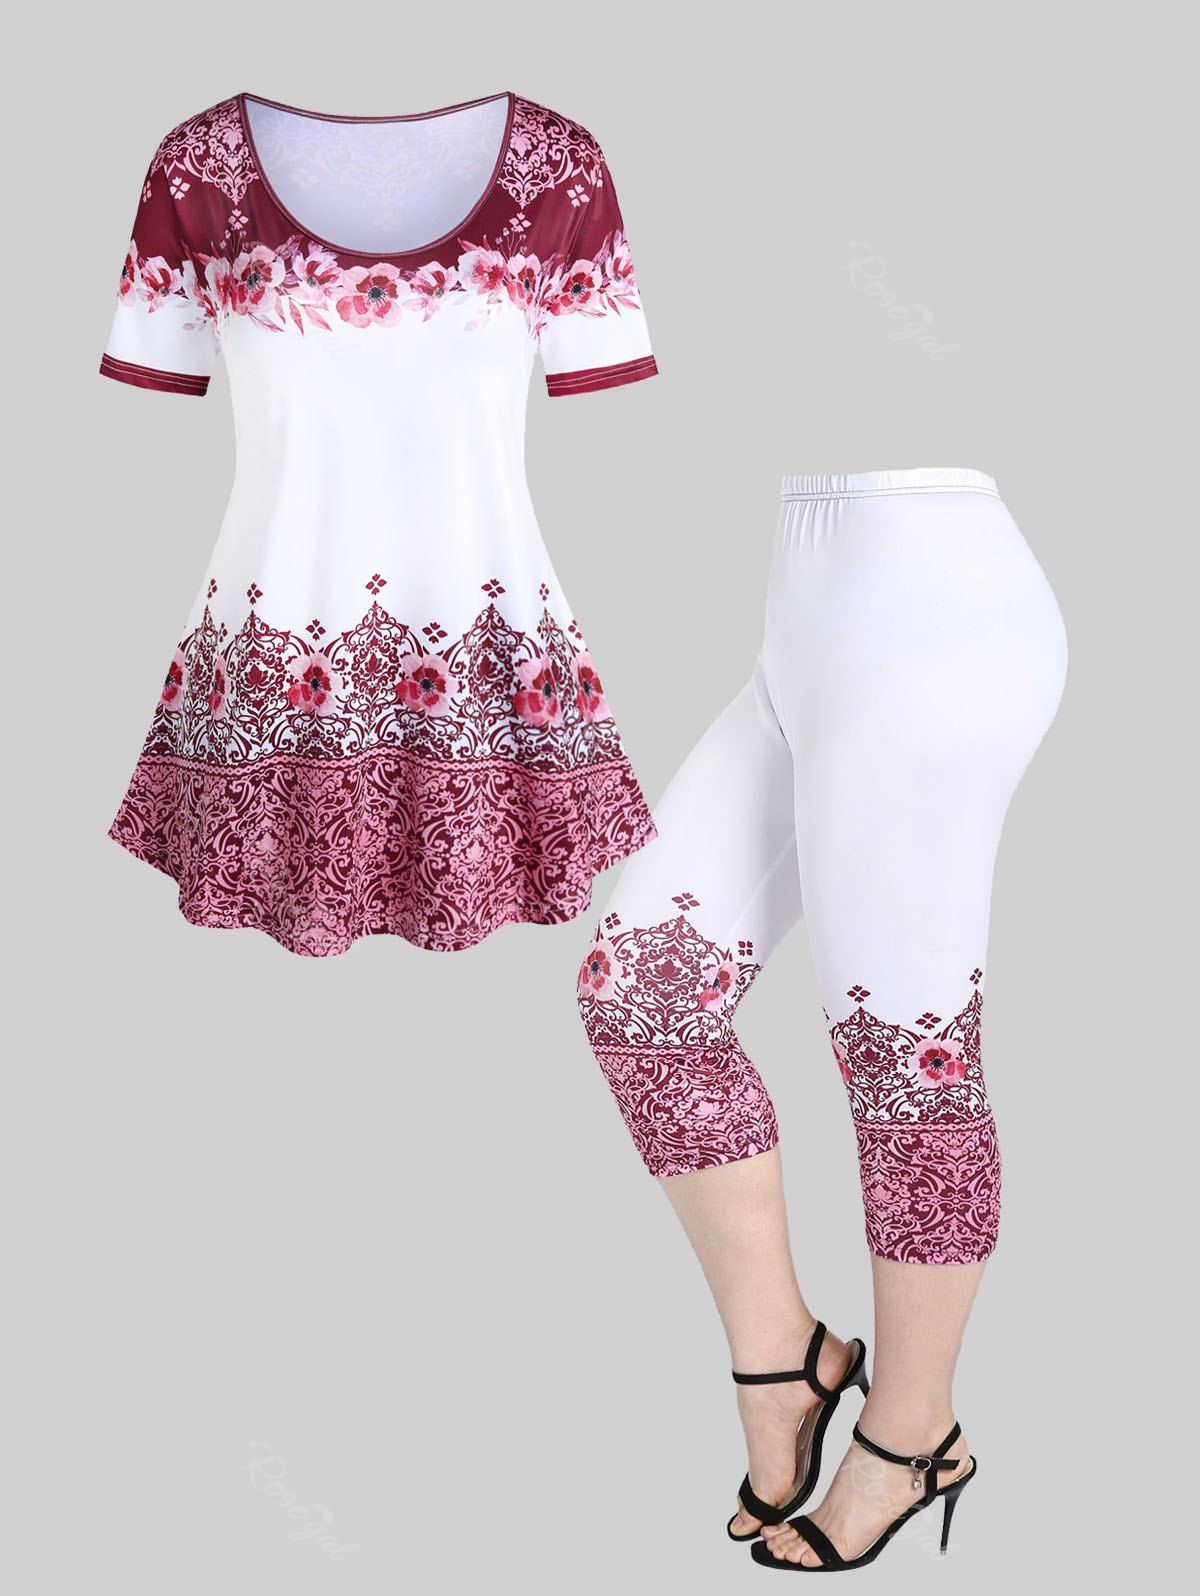 Chic Tribal Floral Print T-shirt and Tribal Floral Print High Waist Capri Leggings Plus Size Summer Outfit  